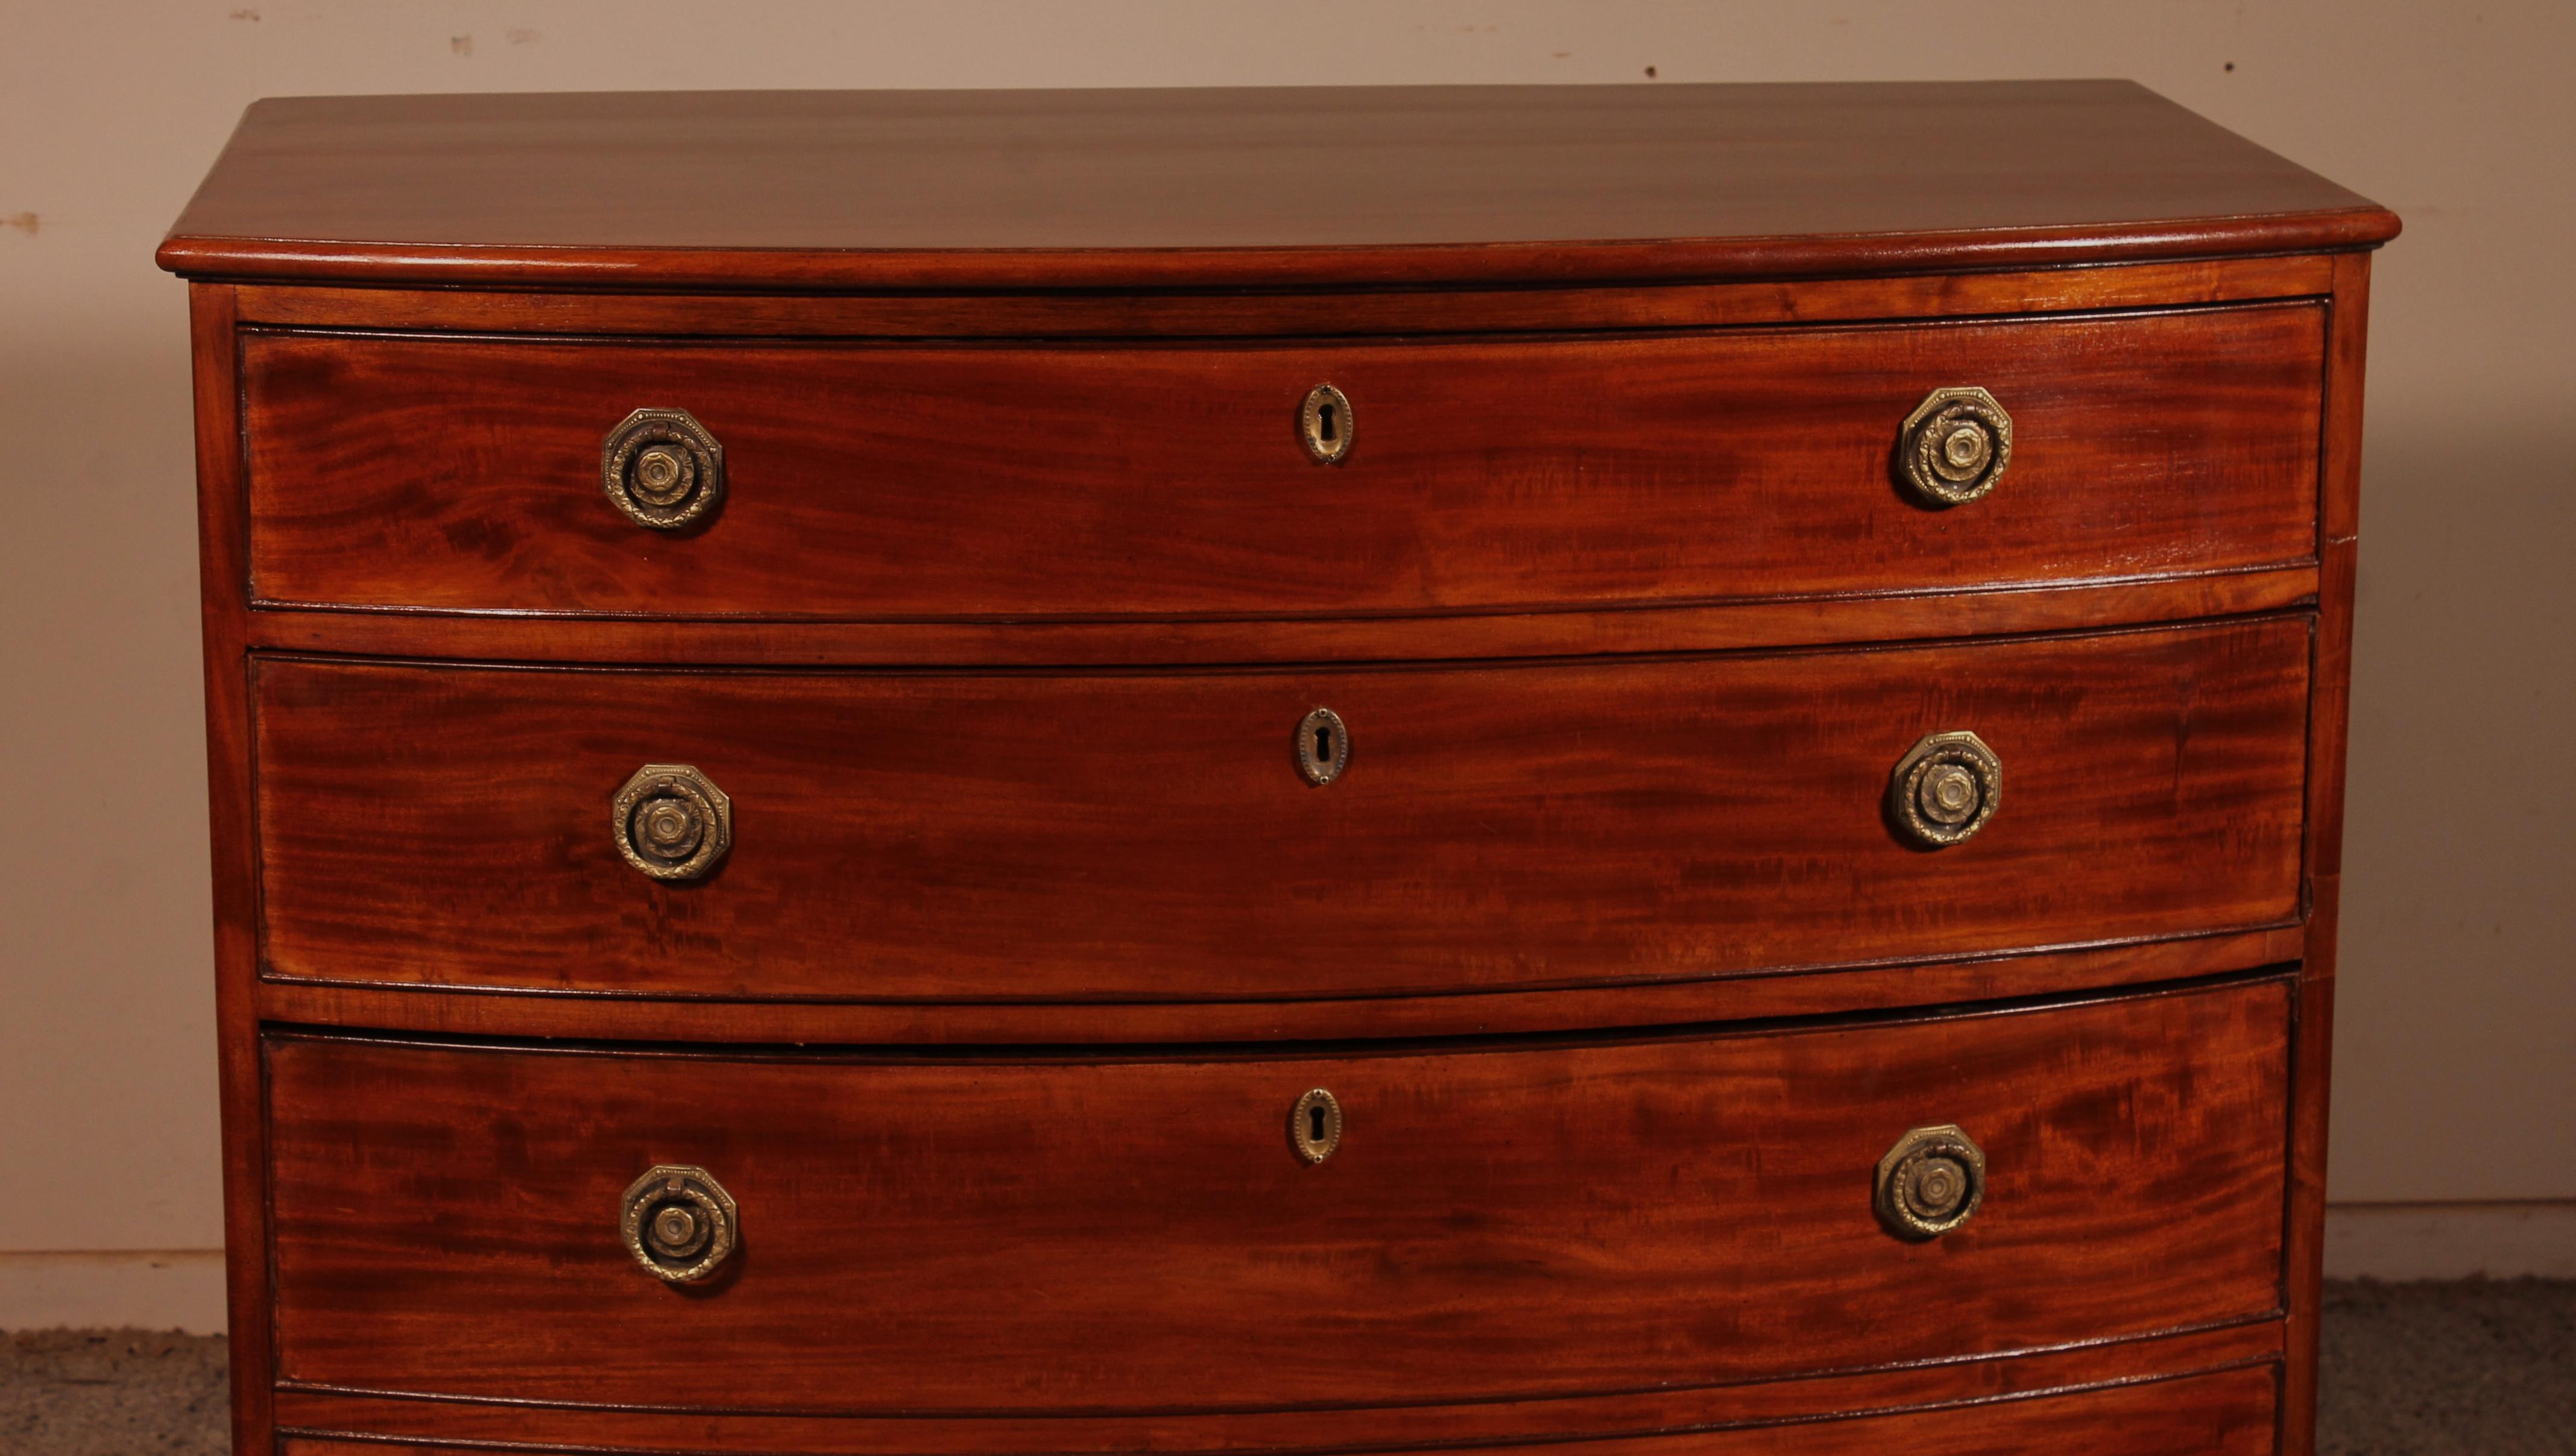 A fine regency bowfront chest of drawers in mahogany from the beginning of the 19th century circa 1800-England

Very beautiful chest of drawers composed of three drawers with a large bottom drawer at the bottom with a fake drawer. Which is unusual